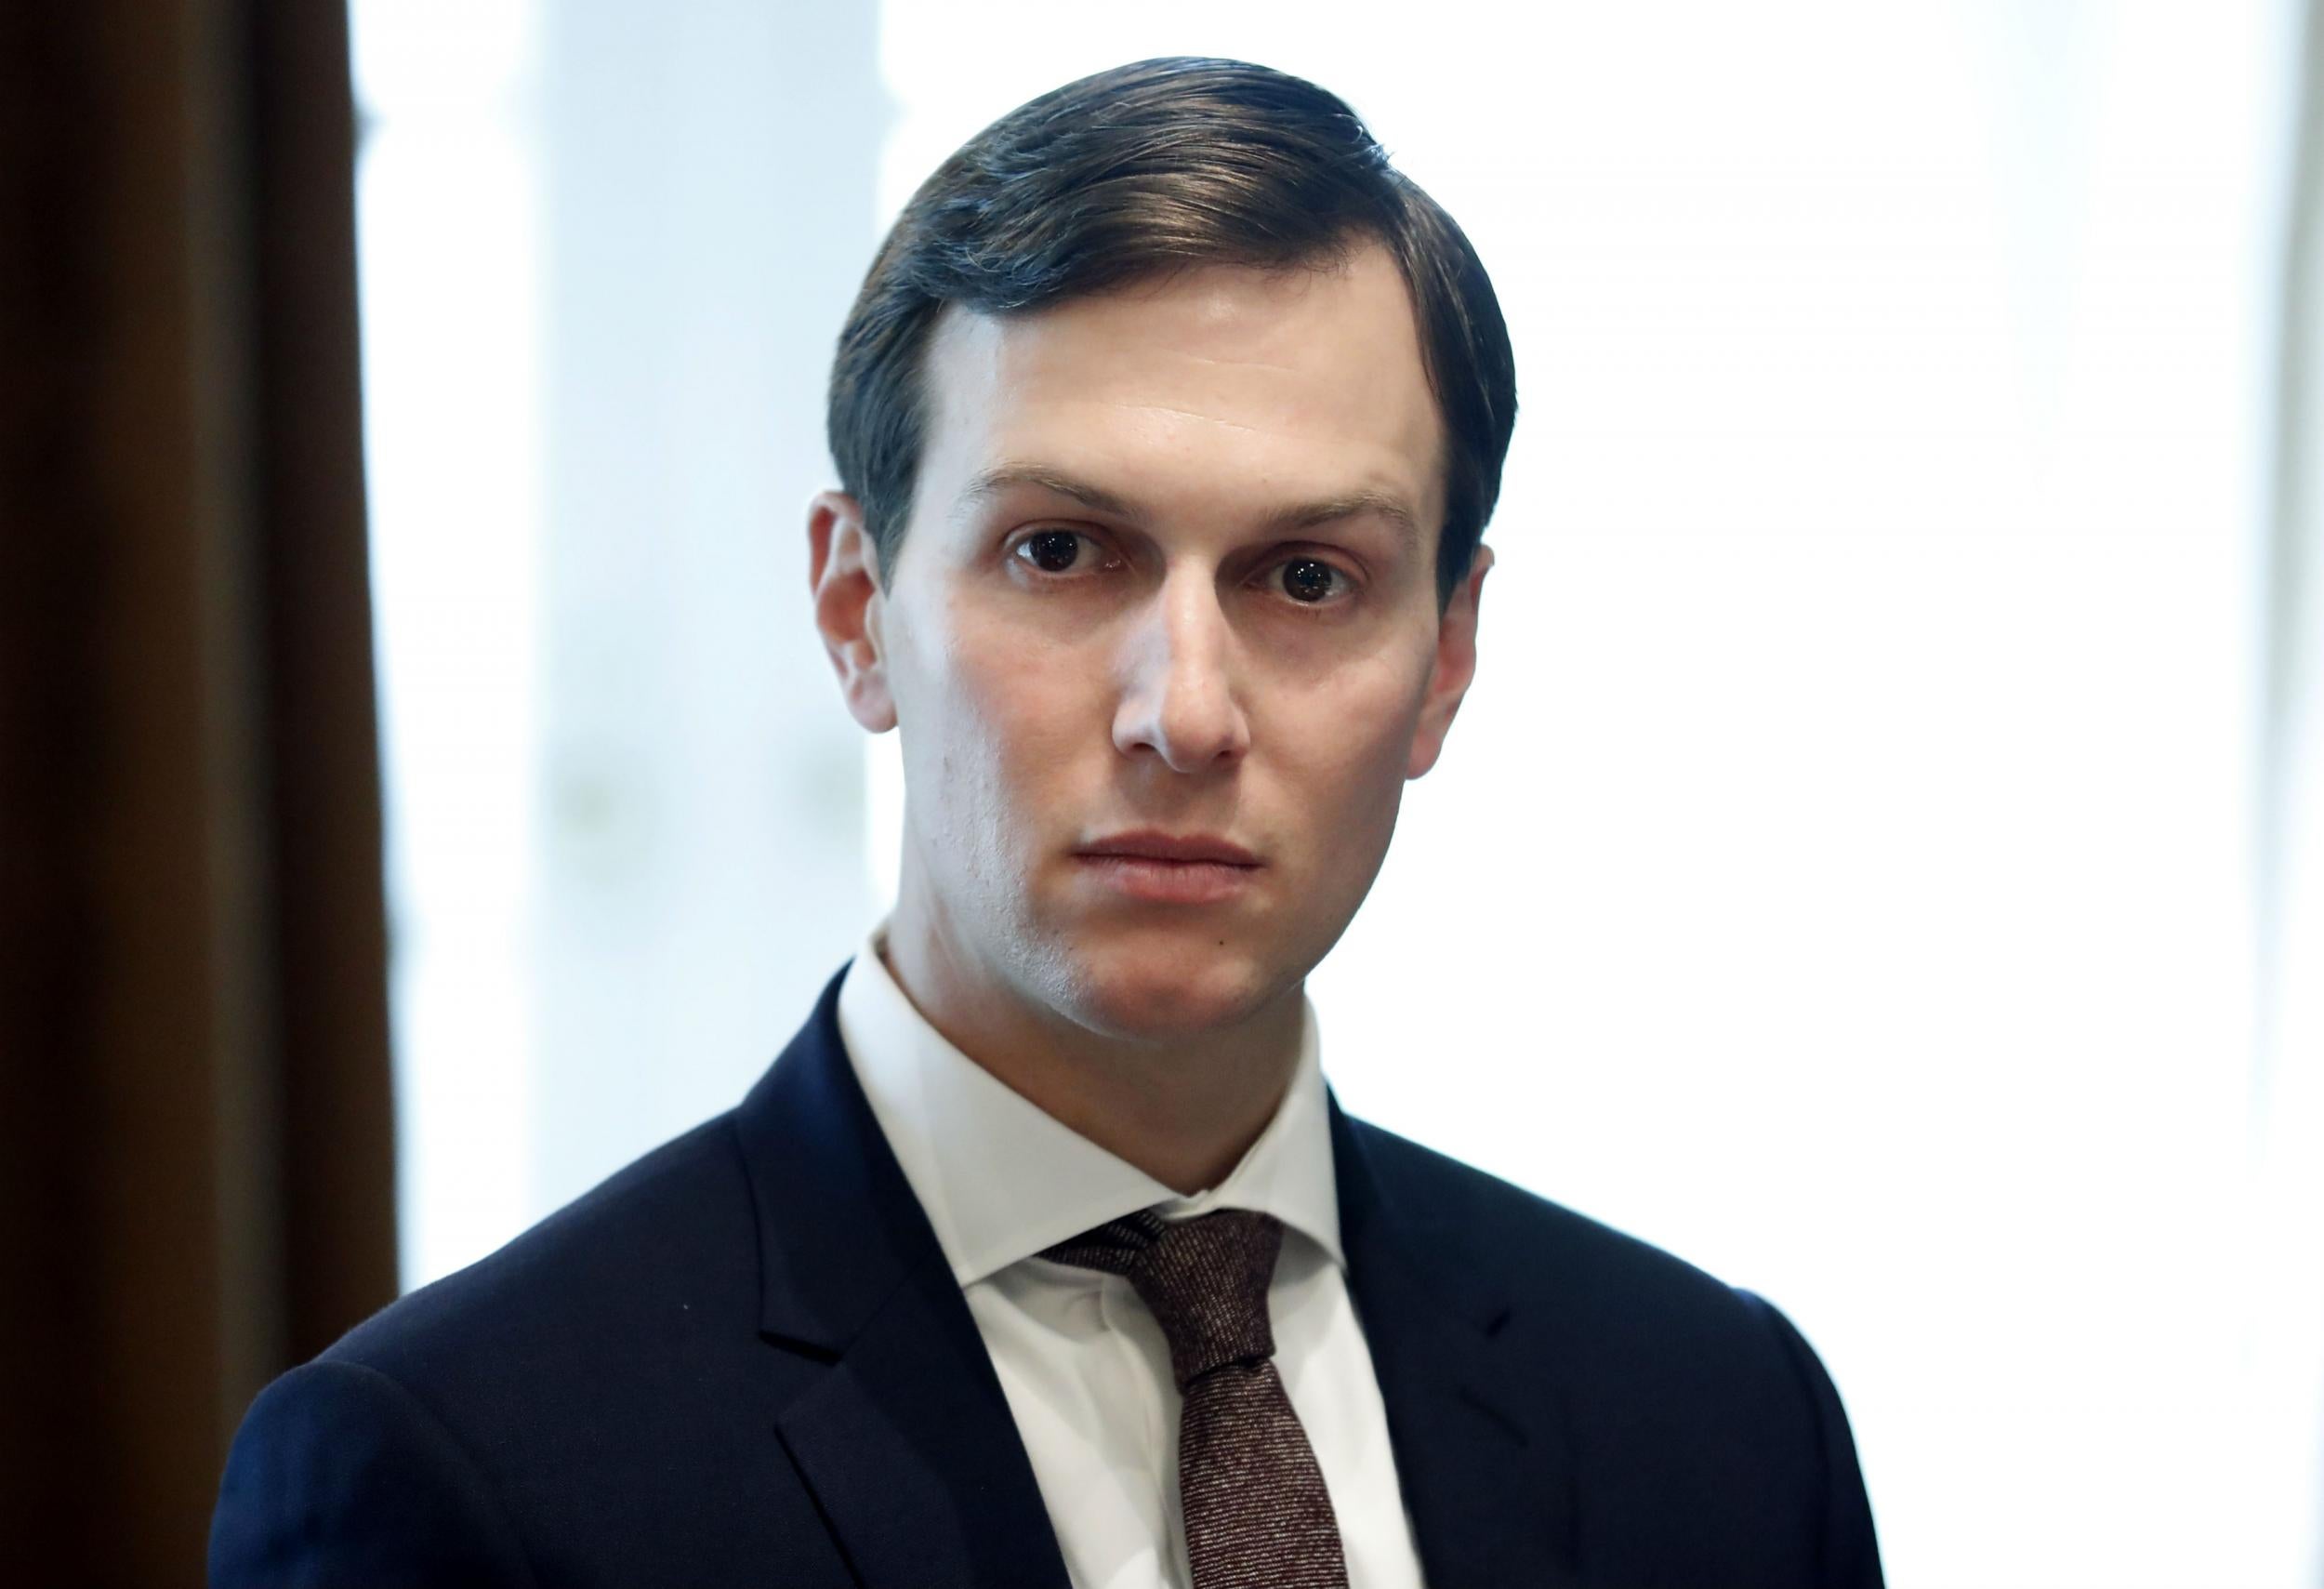 Jared Kushner is facing scrutiny over his use of a private email account (AP)